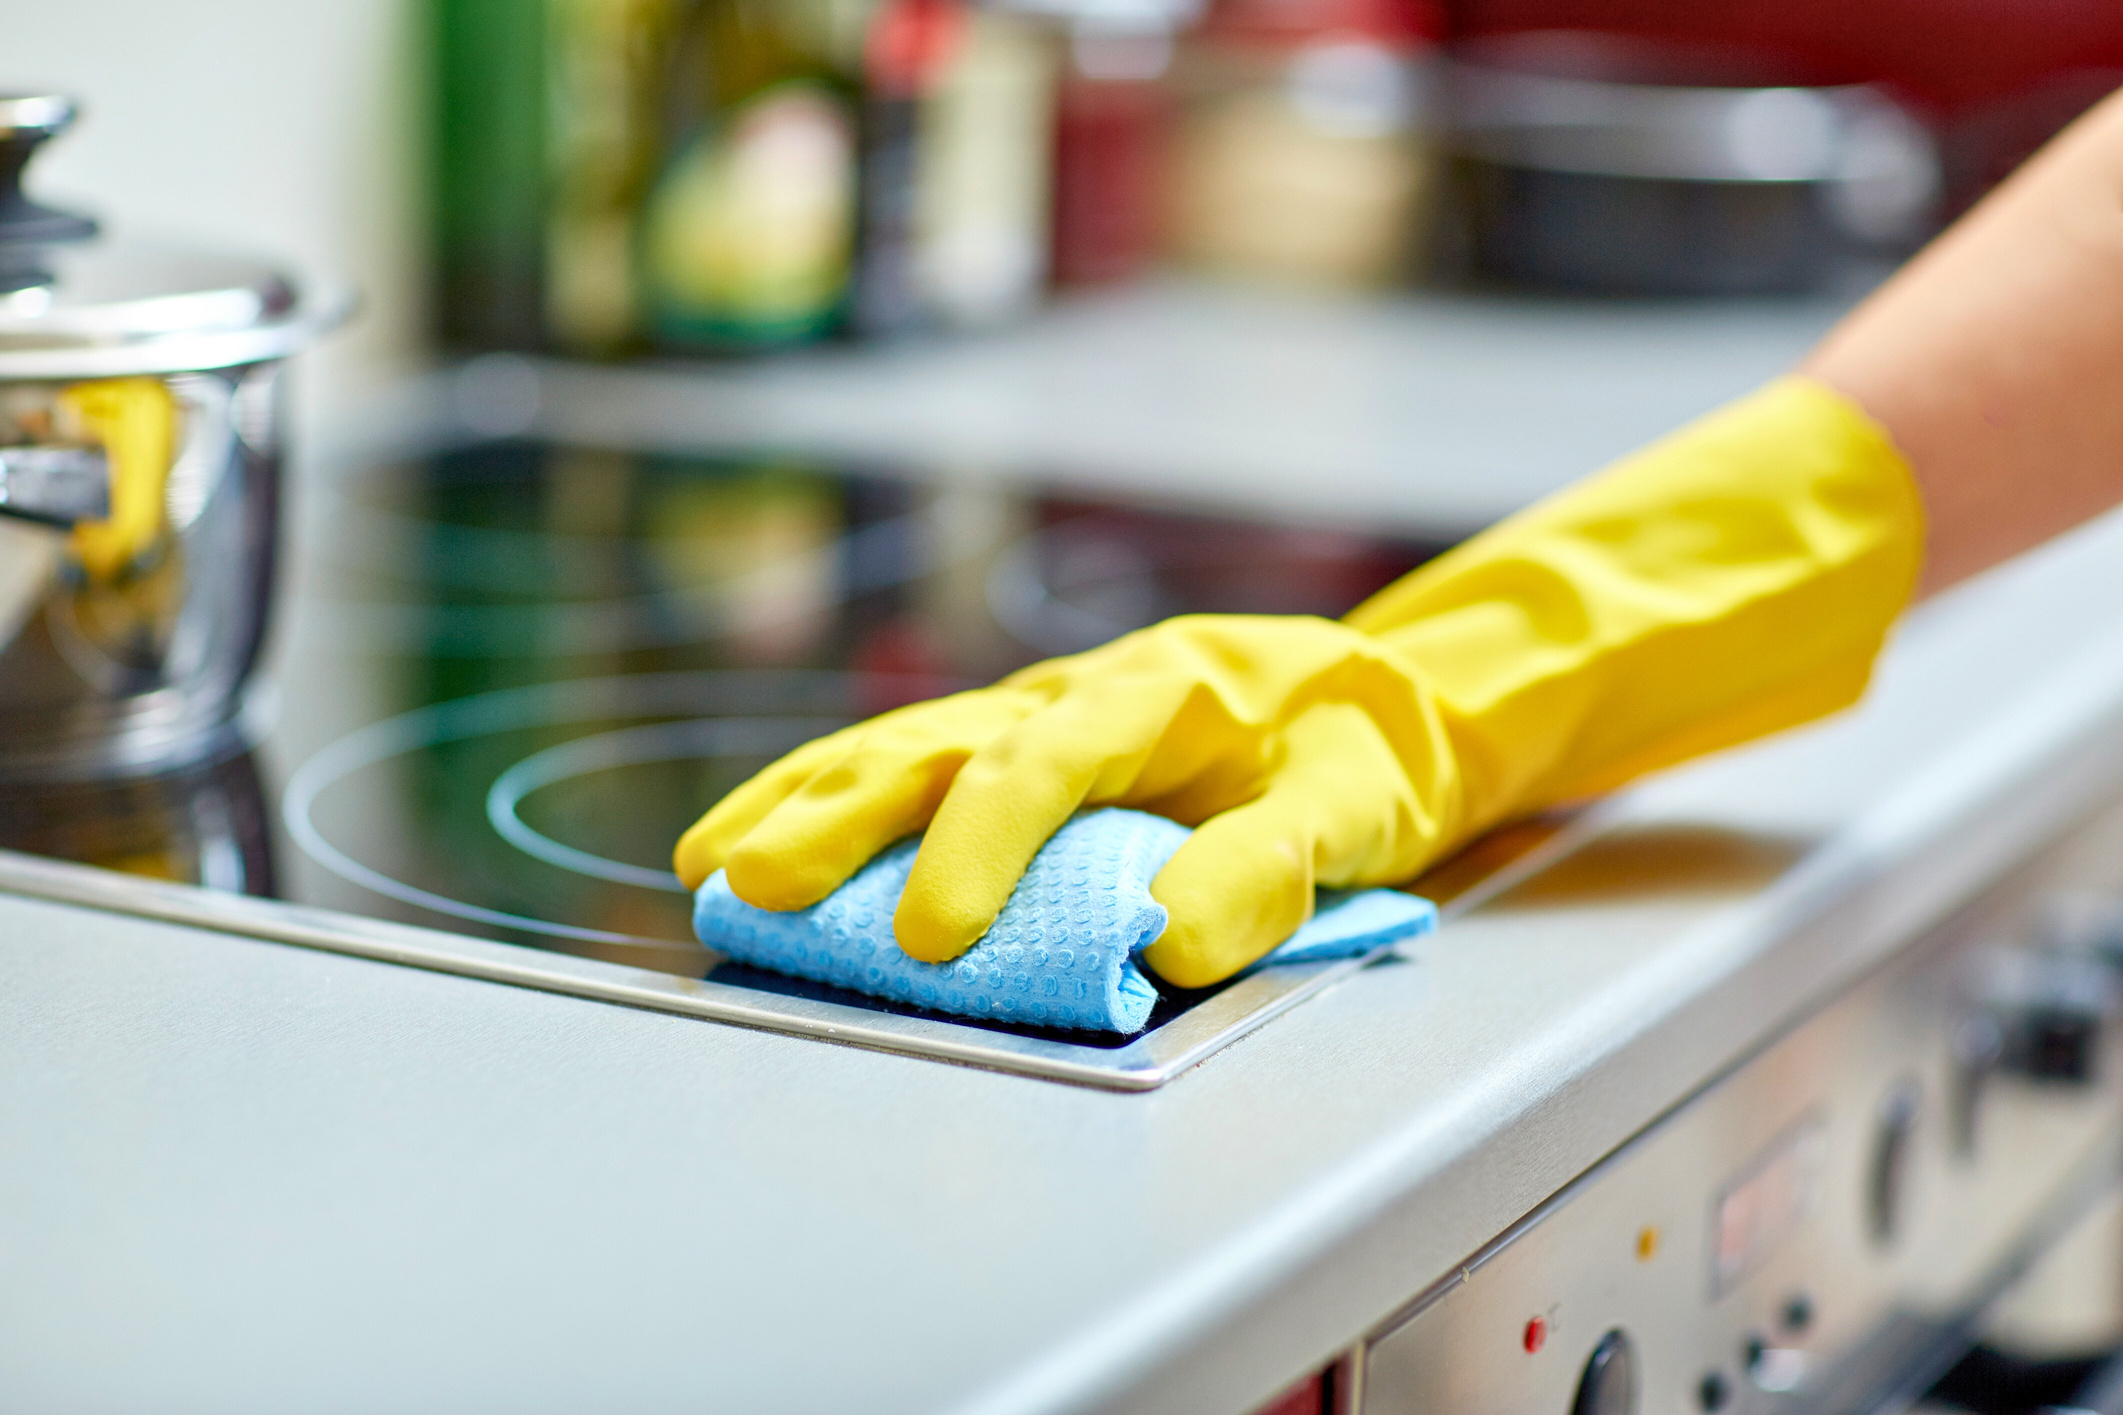 If you’re in Sevenoaks and need cleaning services, We can handle tasks like wiping down the sink, sanitizing kitchen surfaces, and washing dishes.  Thorough approach ensures a sparkling kitchen, leaving your home looking pristine.